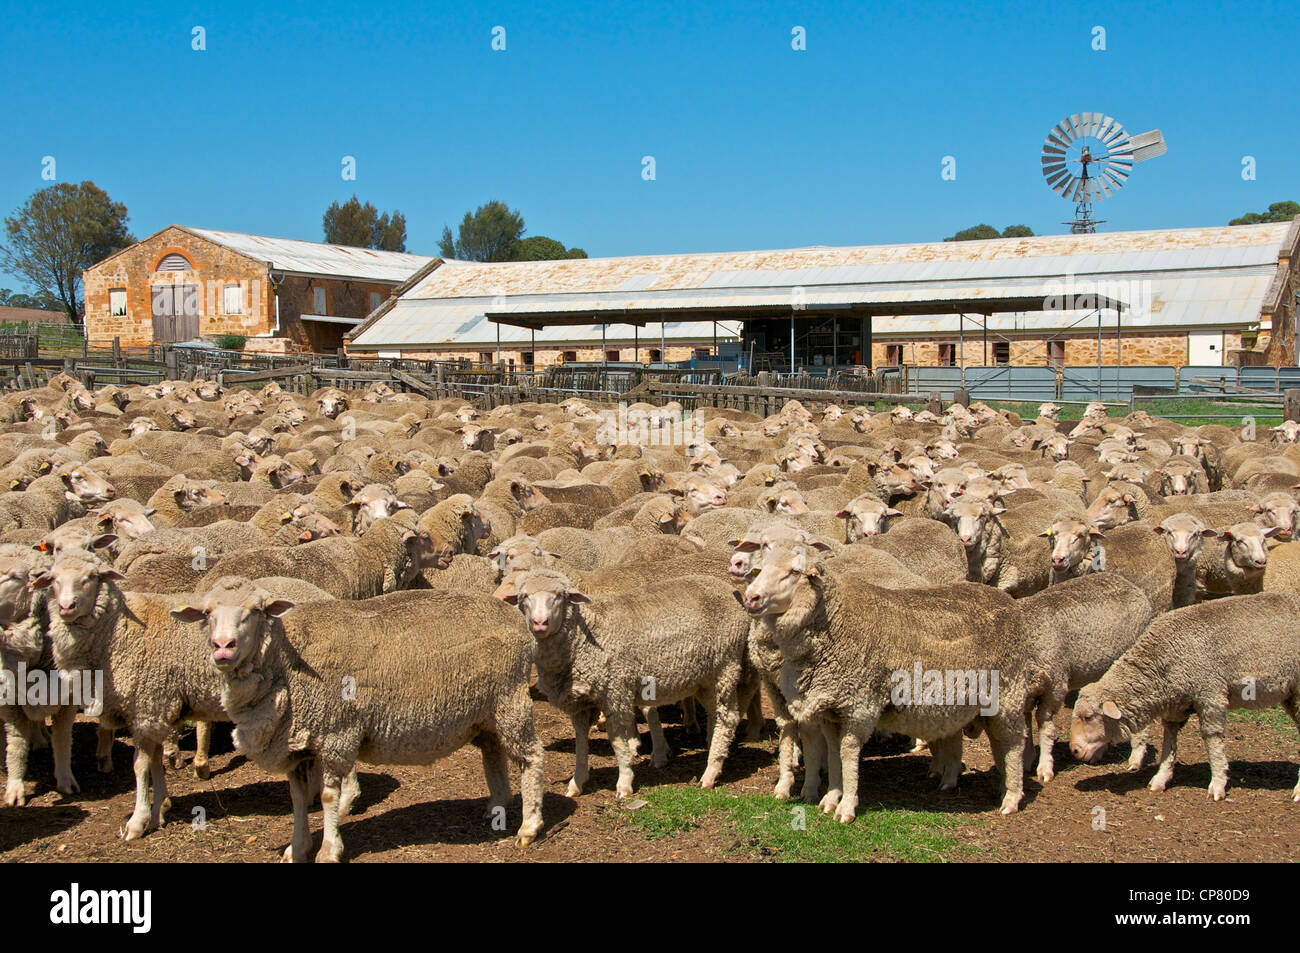 Marino sheep Station Bungaree Clare Valley Australie du Sud Banque D'Images